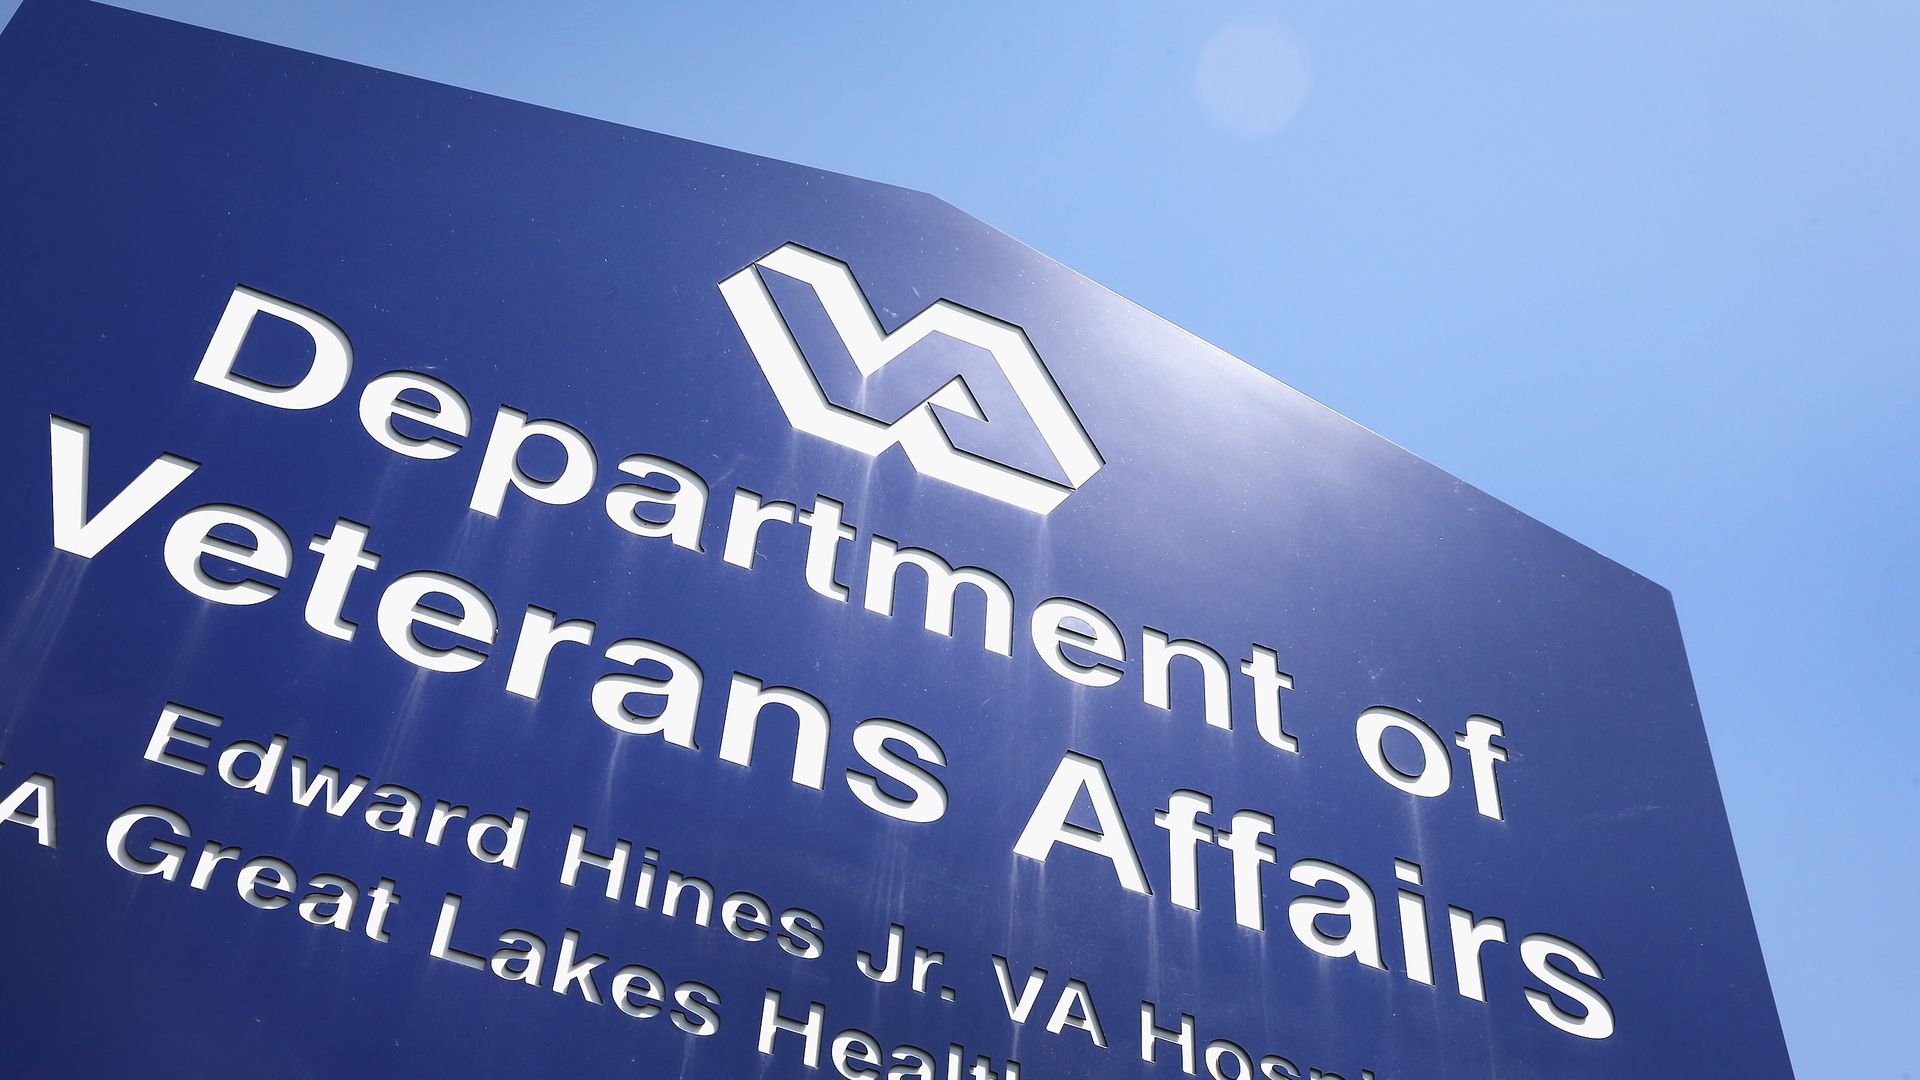 A sign outside the VA hospital in Hines, Illinois.